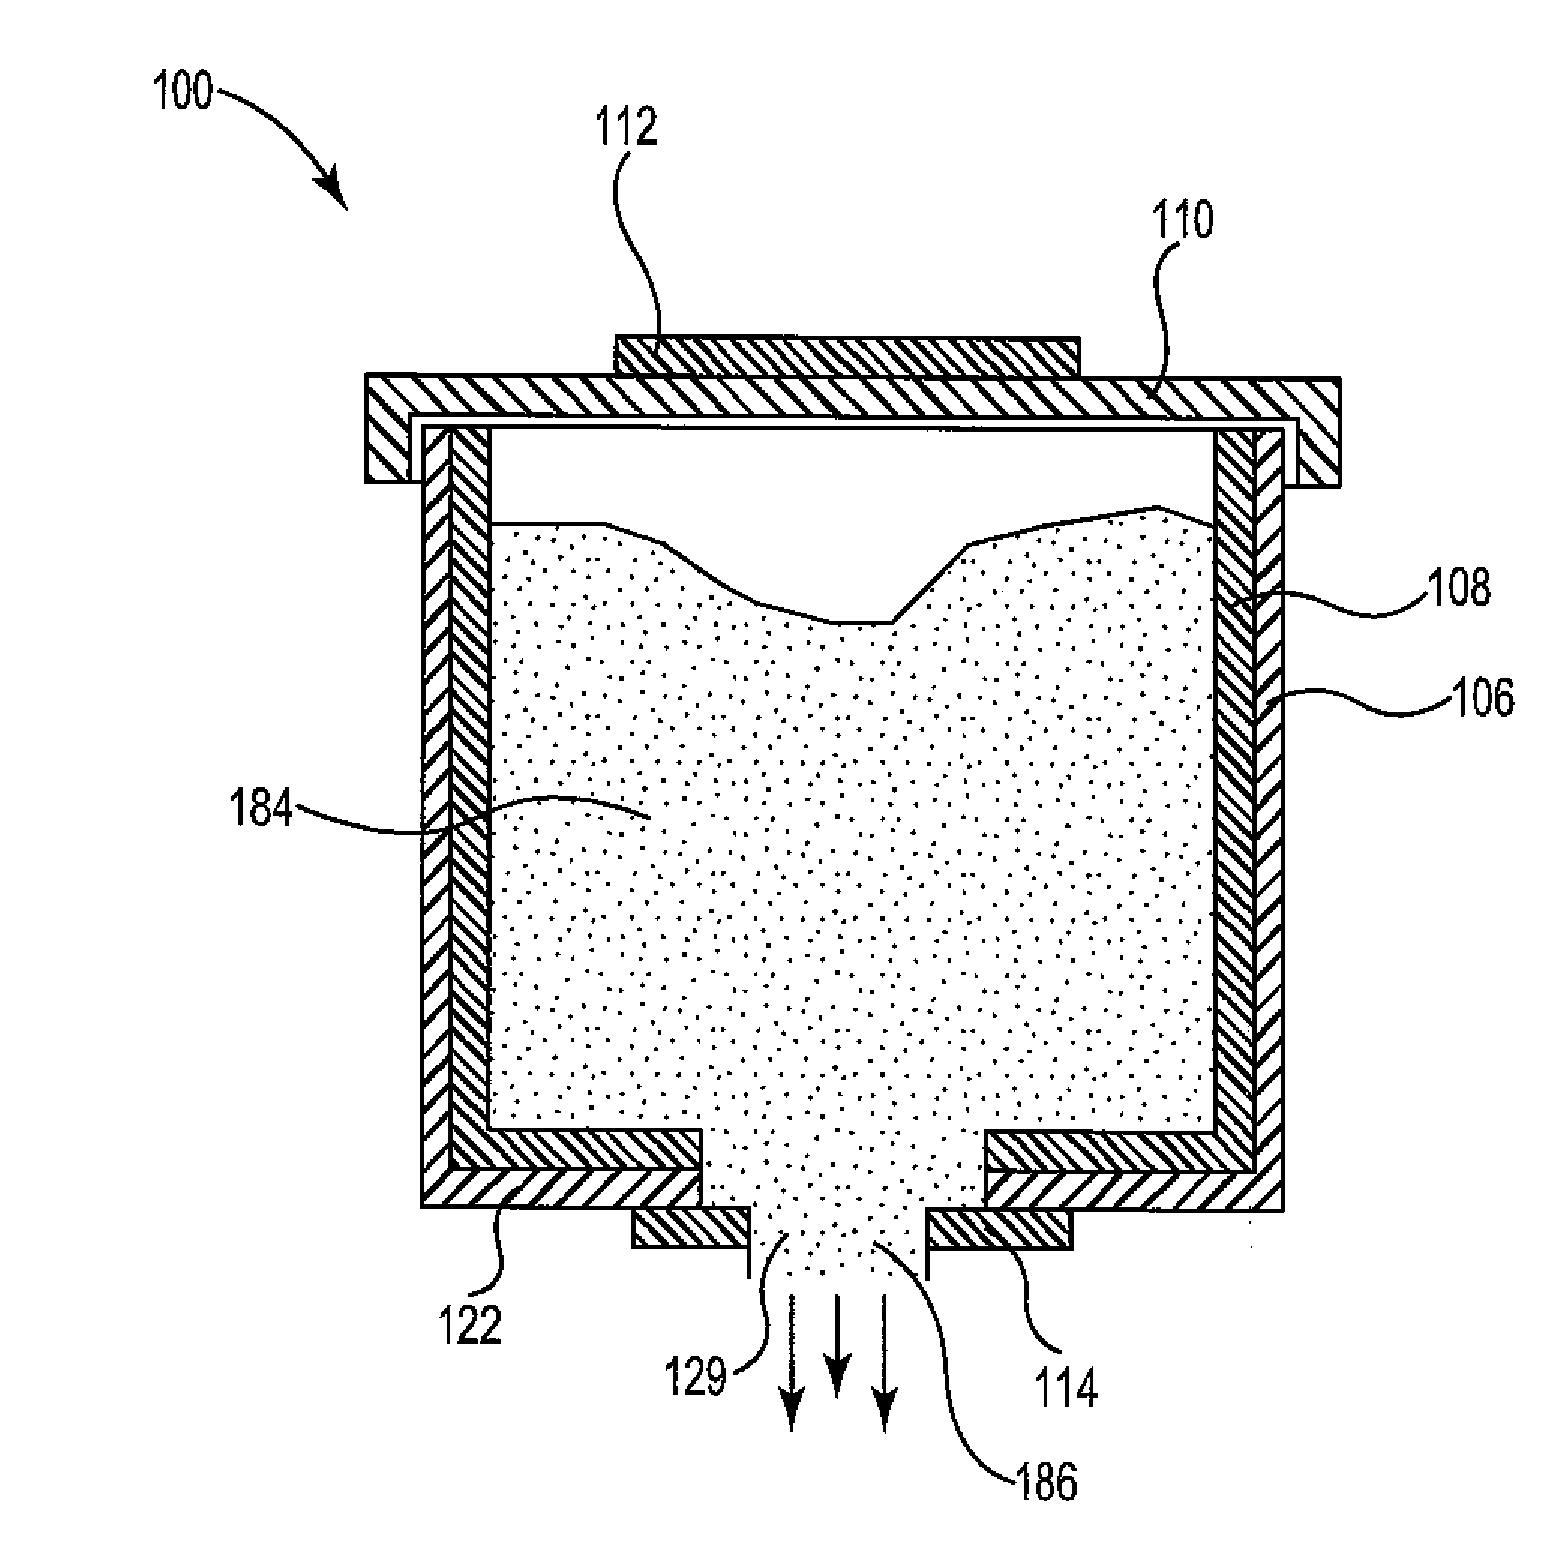 Container system for hydraulic fracturing proppants